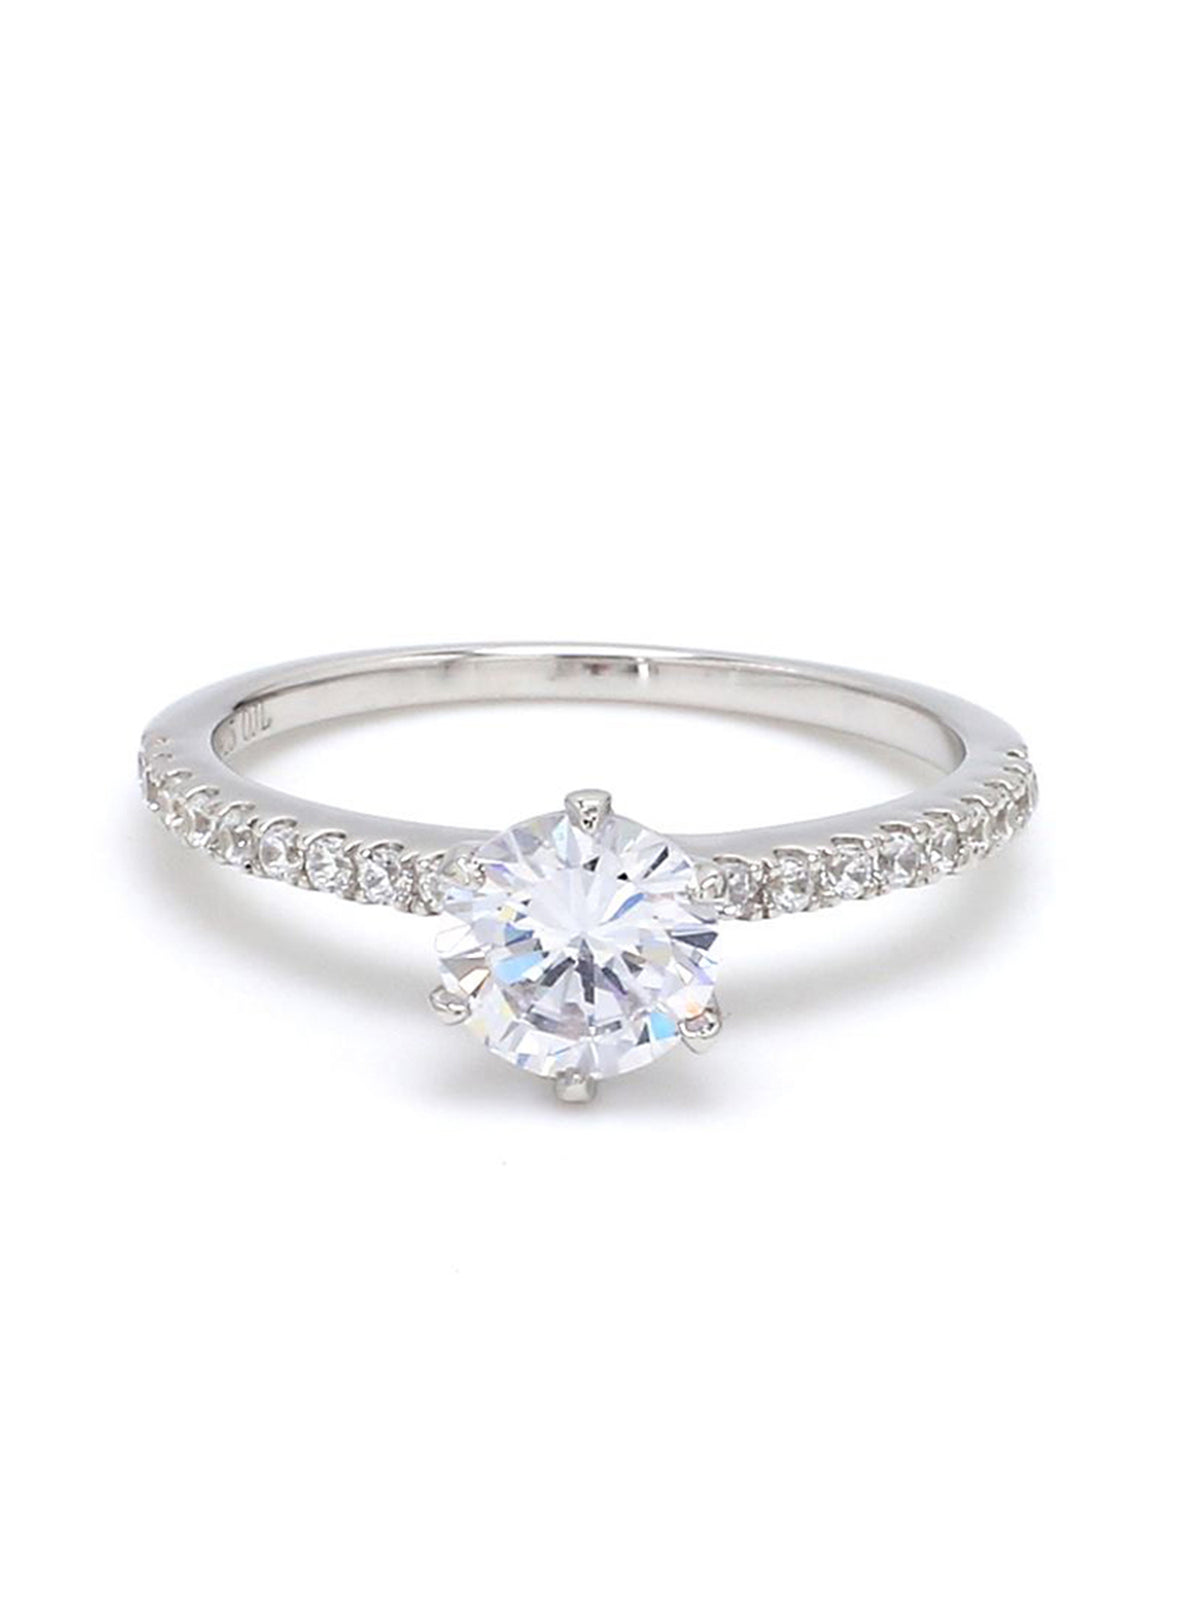 STERLING SILVER 1 CARAT AMERICAN DIAMOND SOLITAIRE RING